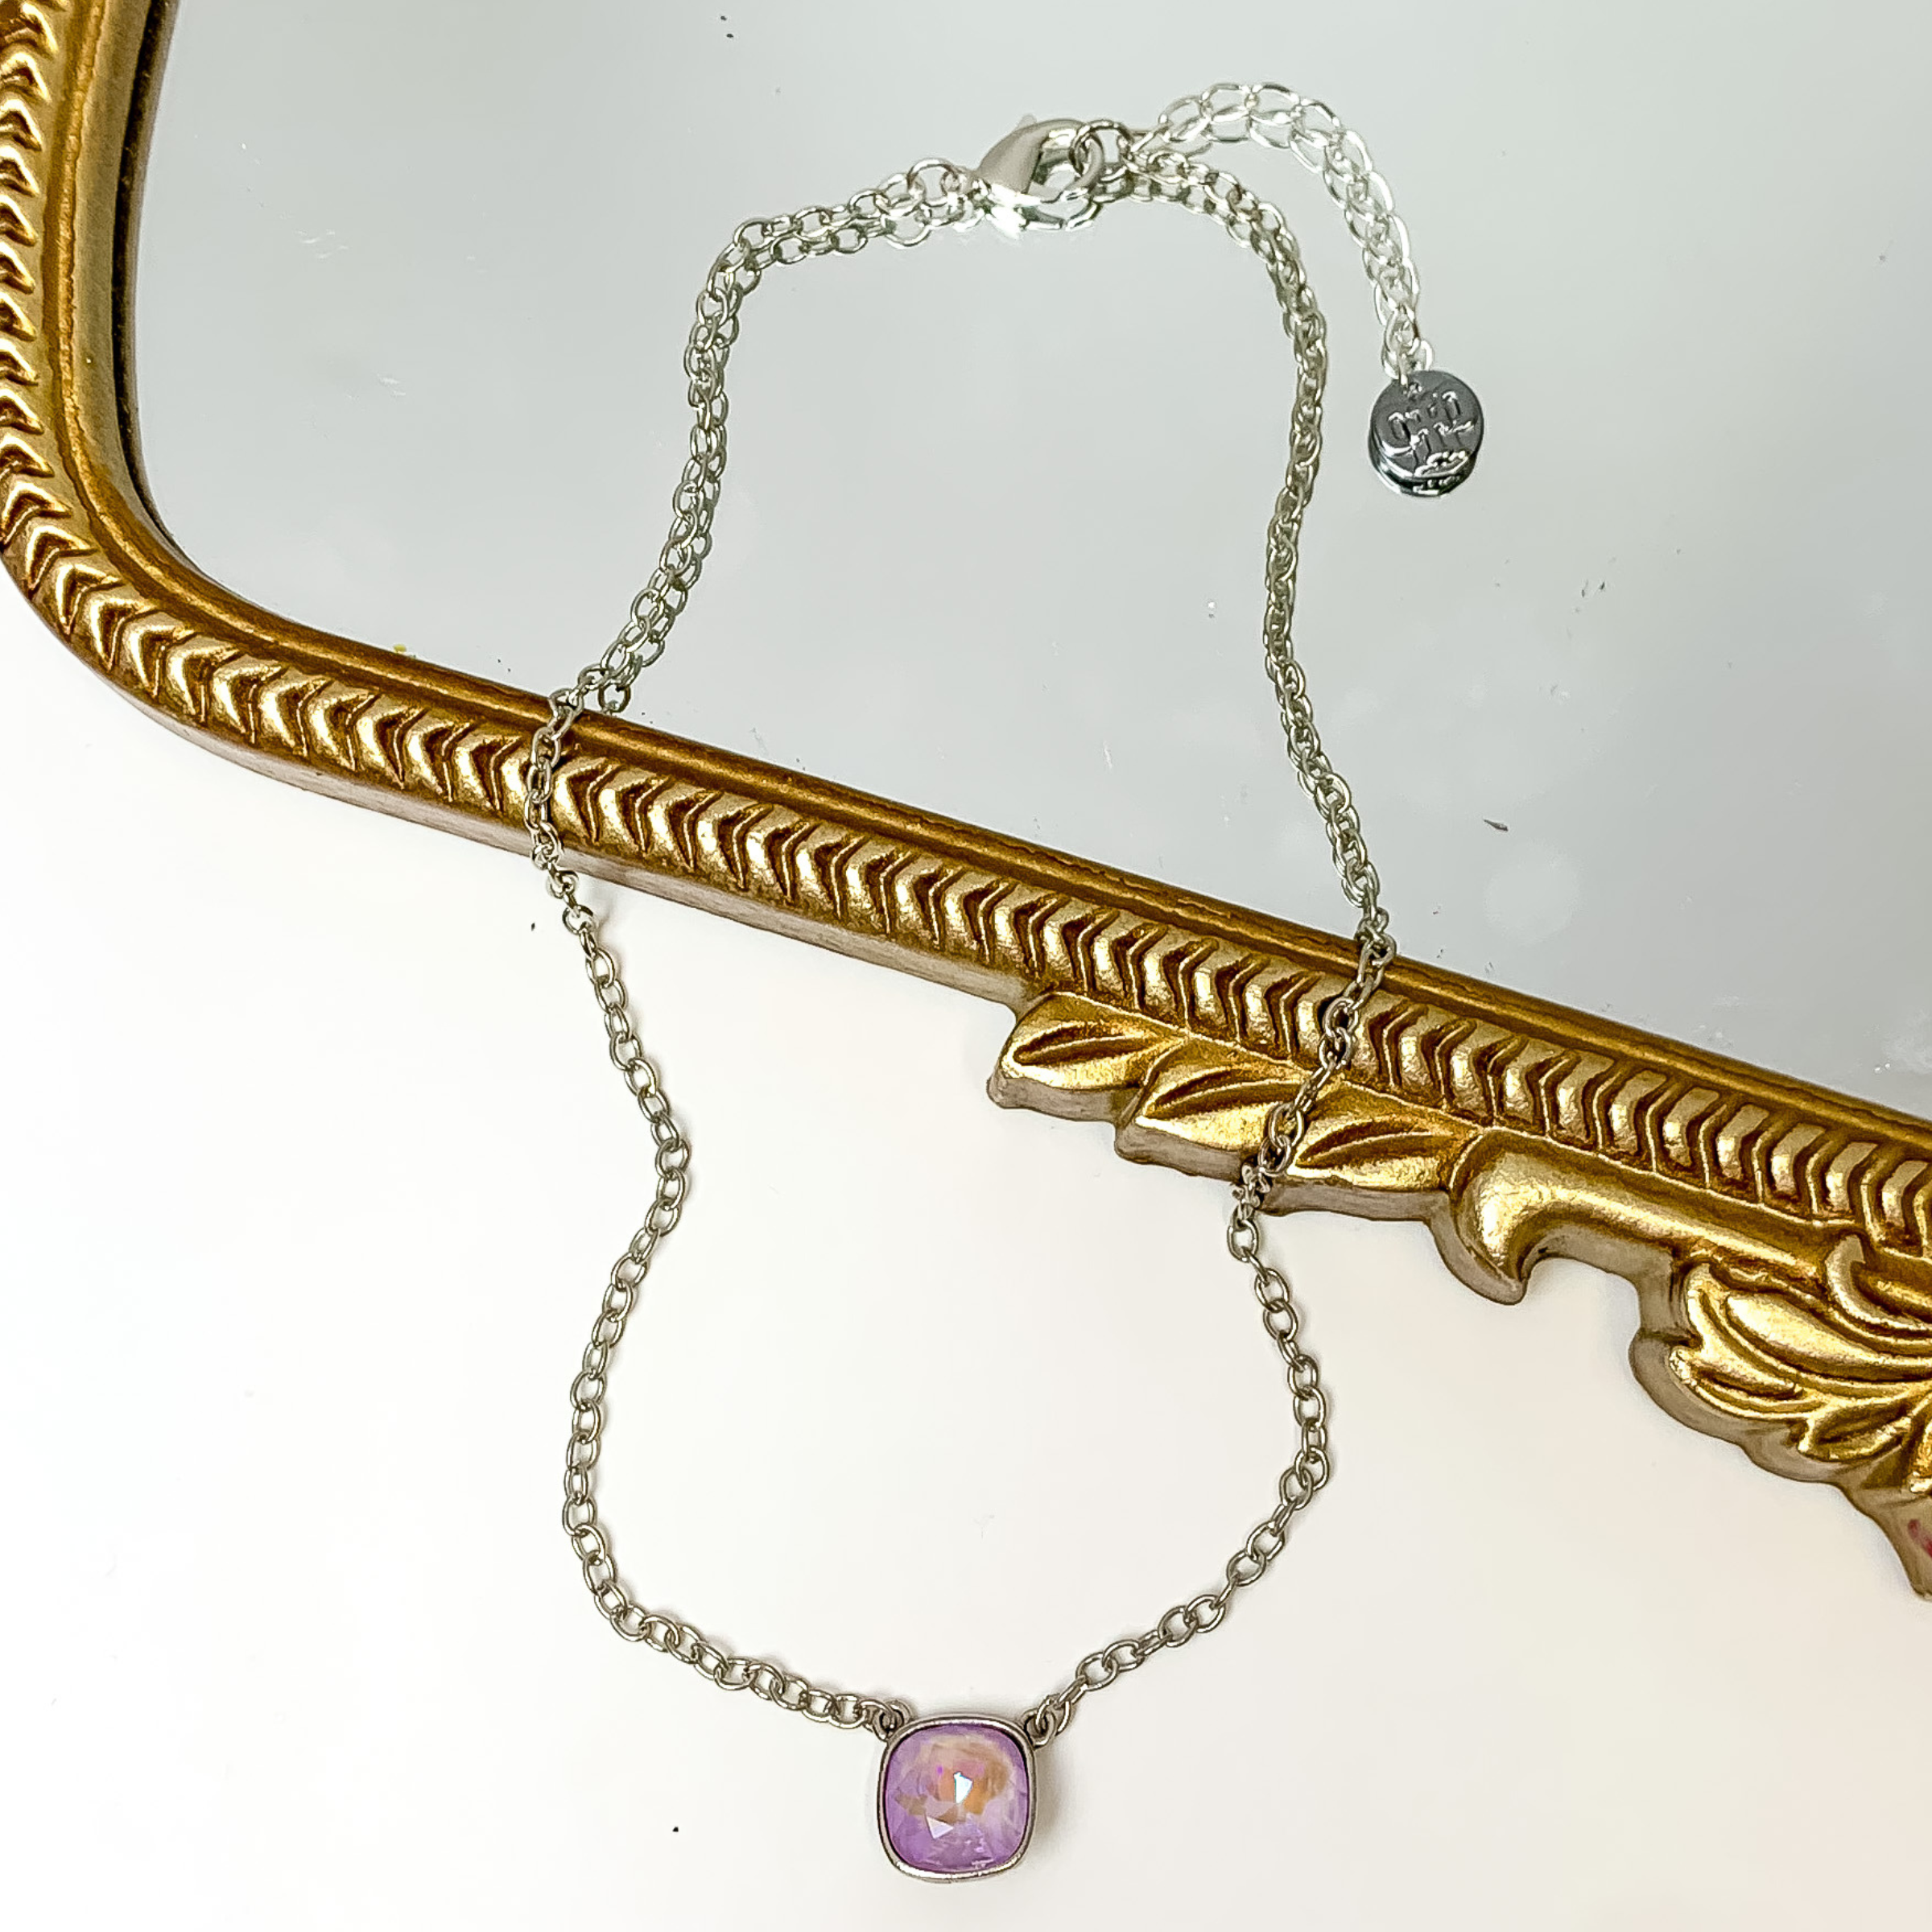 Silver chain necklace with a lavender cushion cut crystal. This necklace is pictured partially laying on a gold mirror on a white background.